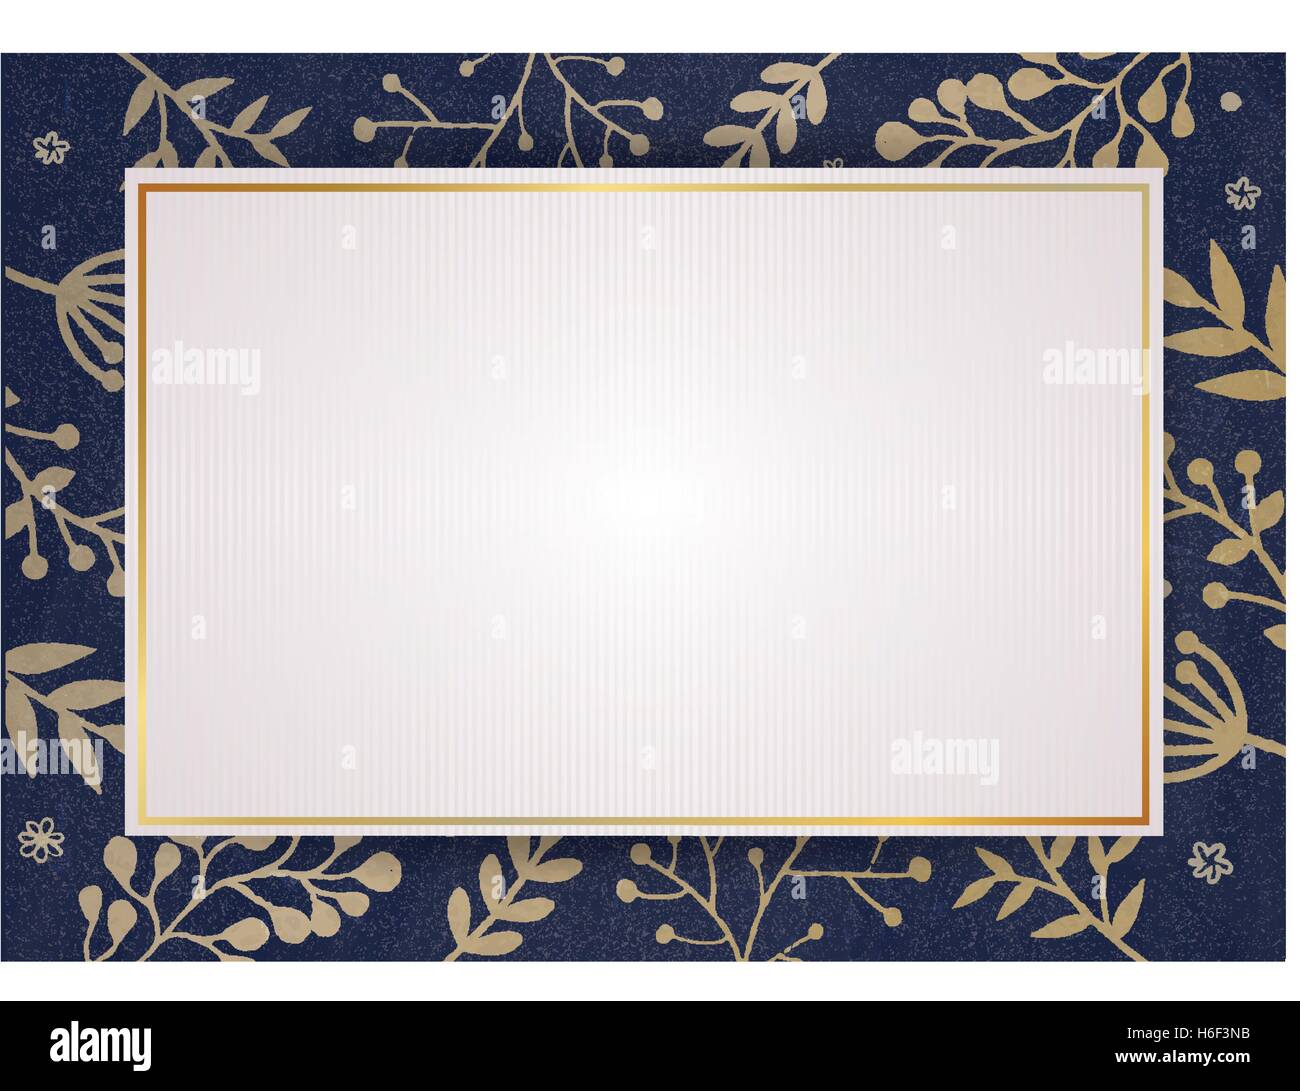 A4 document size Elegant invitation card with florals border Stock Vector